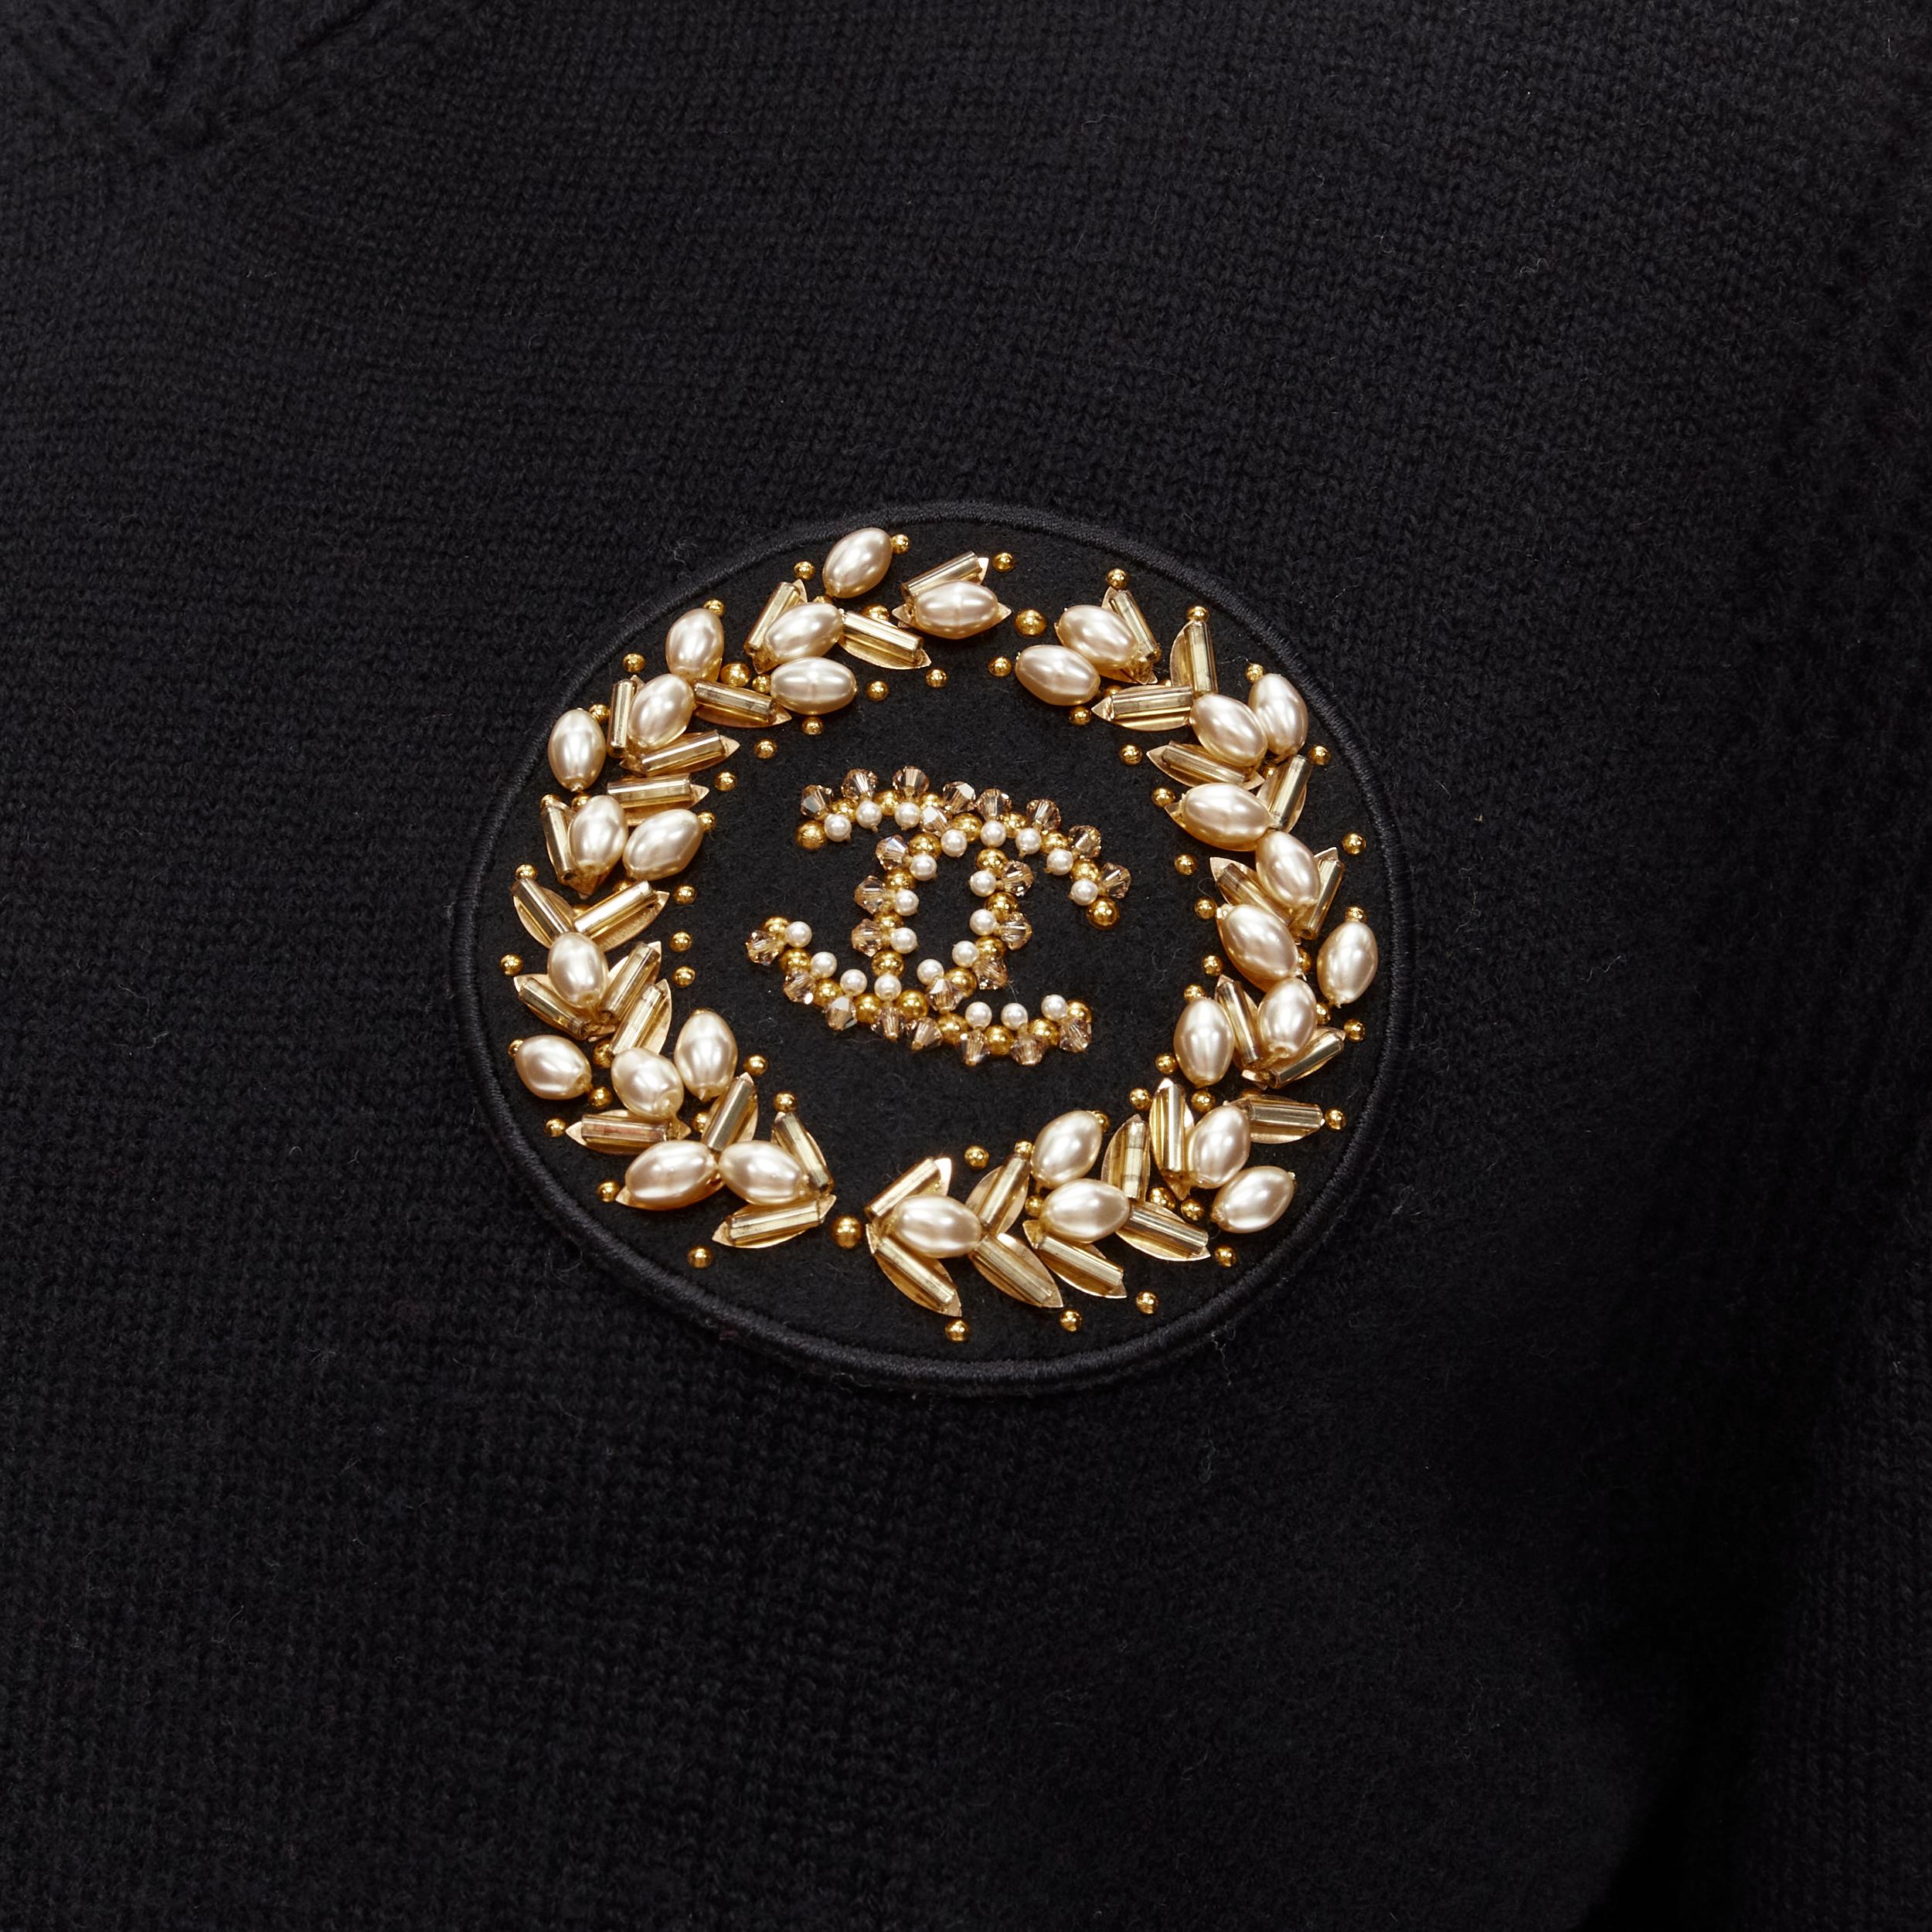 CHANEL black cashmere blend gold bead pearl CC embellished badge sweater FR42  L
Brand: Chanel
Material: Cashmere
Color: Black
Pattern: Solid
Extra Detail: Ribbed detailing at collar and along shoulder seams. Gold-tone metal and pearl bead